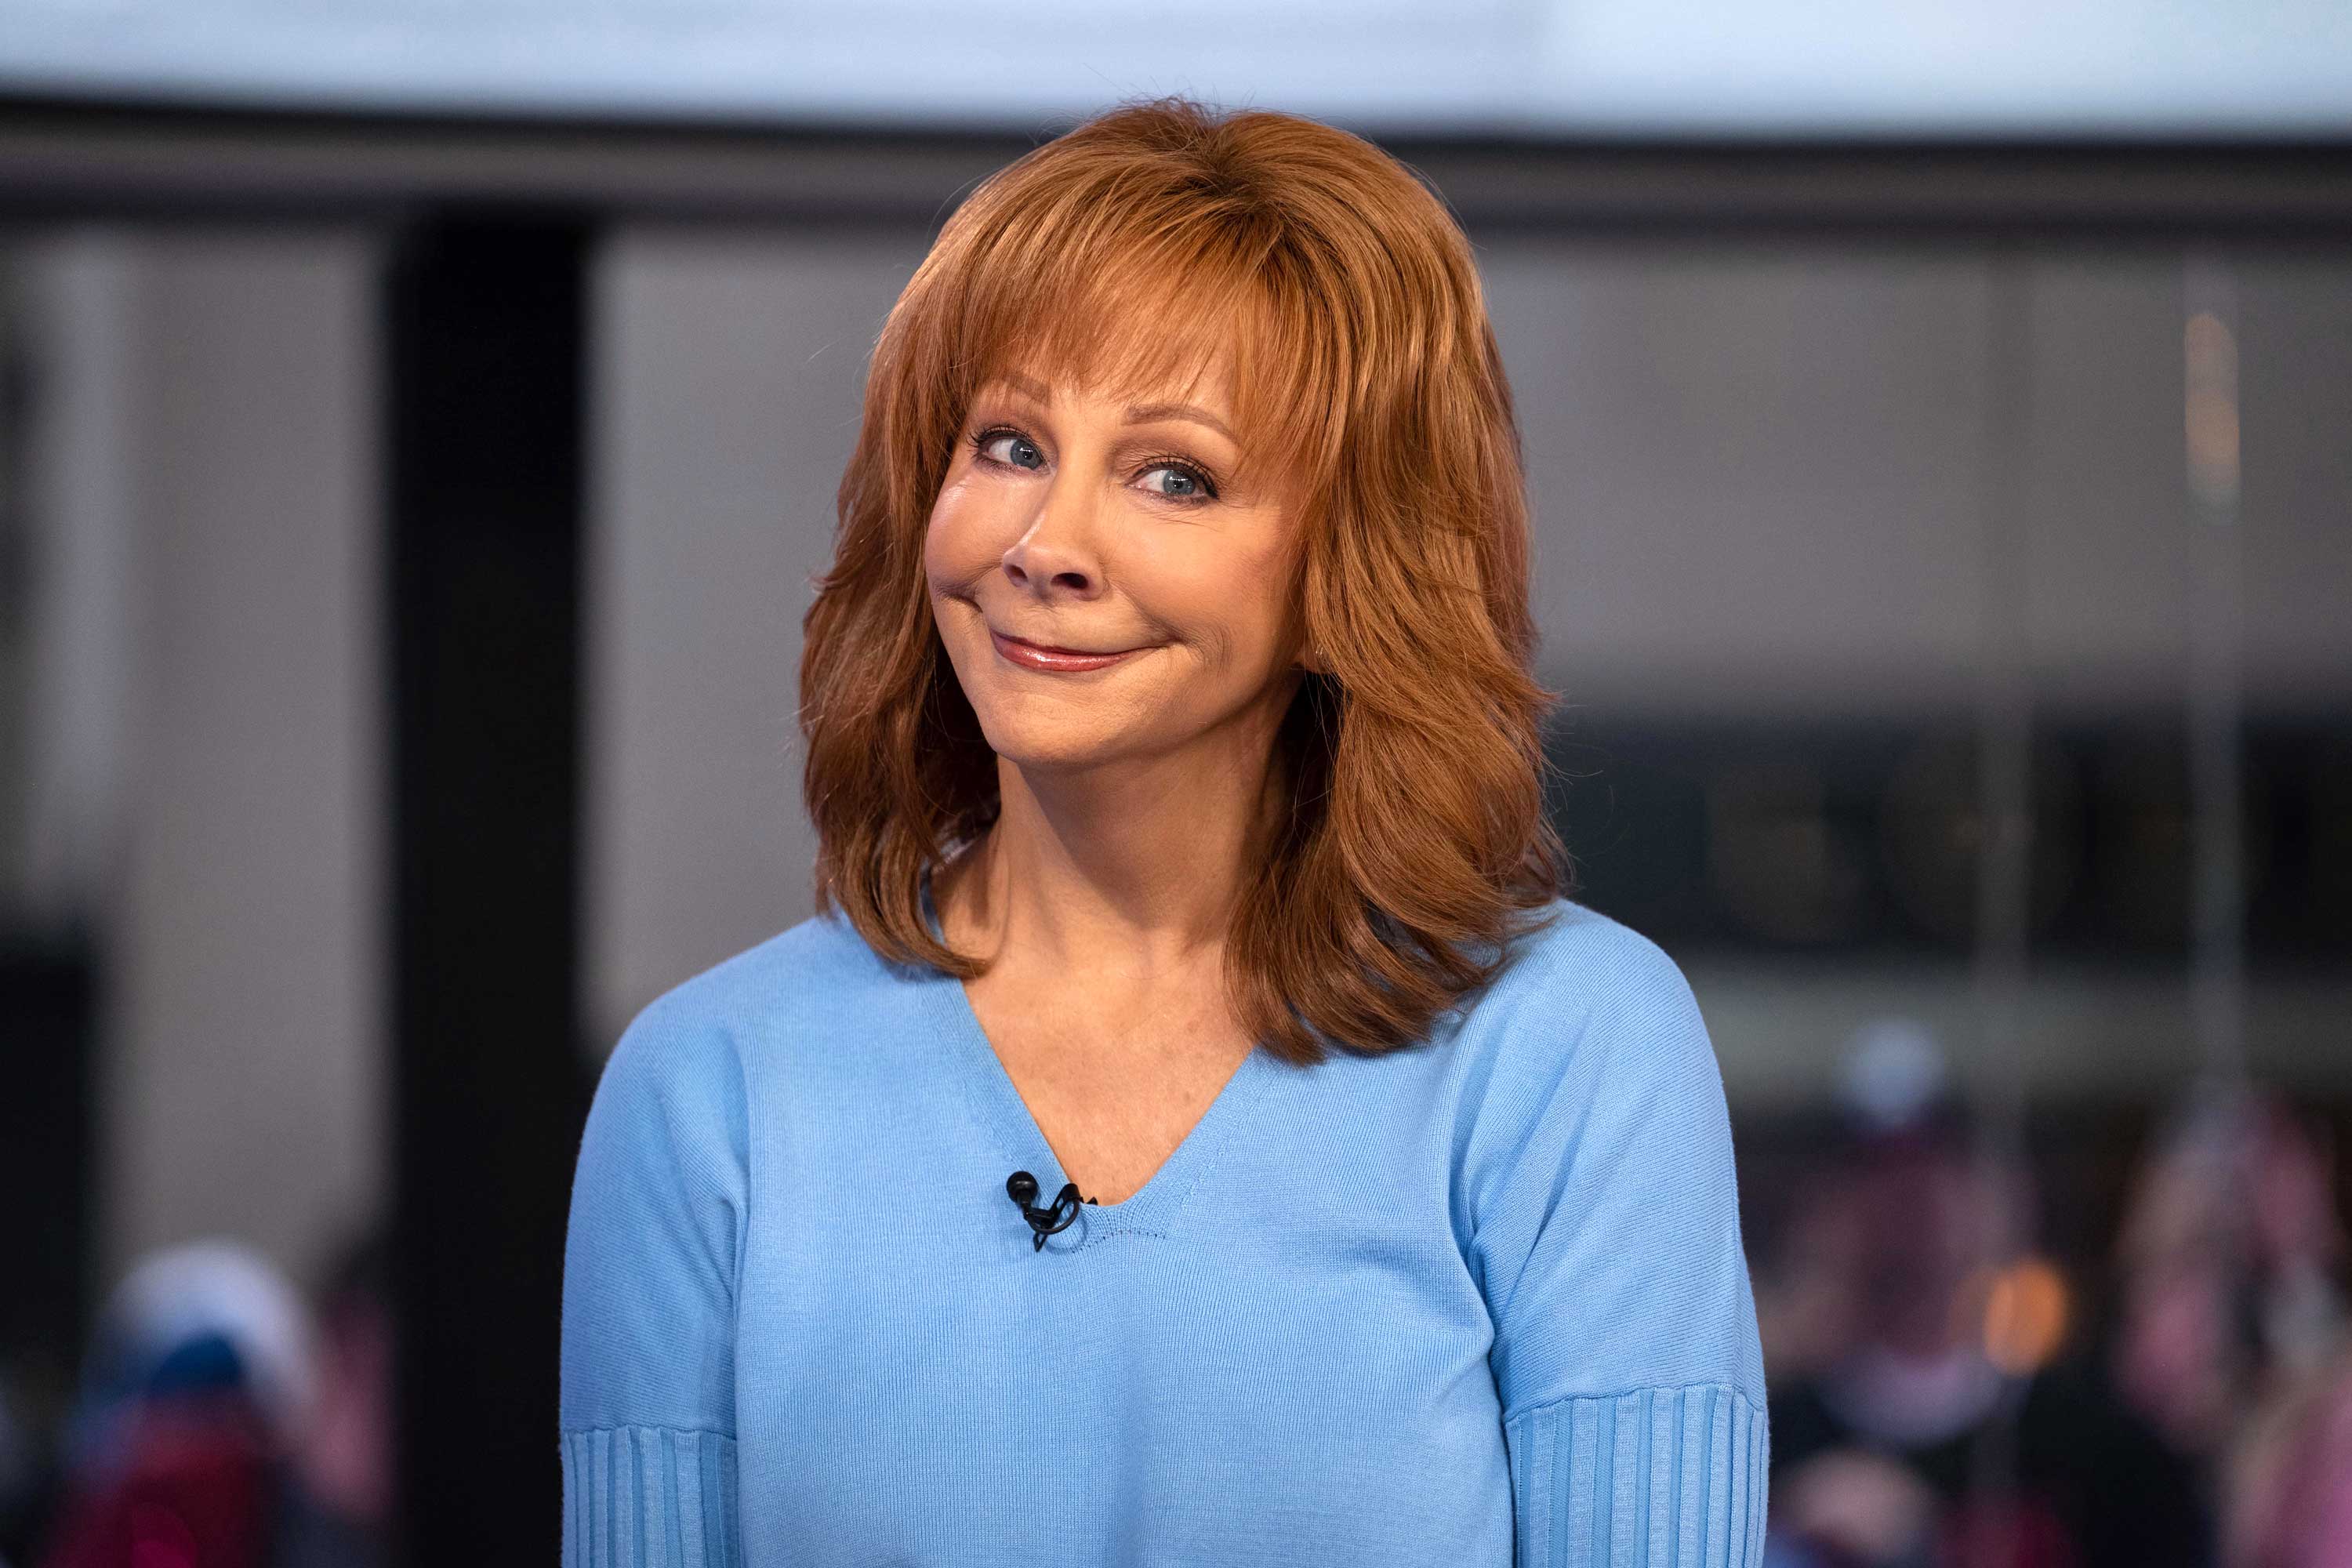 Reba McEntire's Movies & TV Shows, Tremors to Young Sheldon | NBC Insider